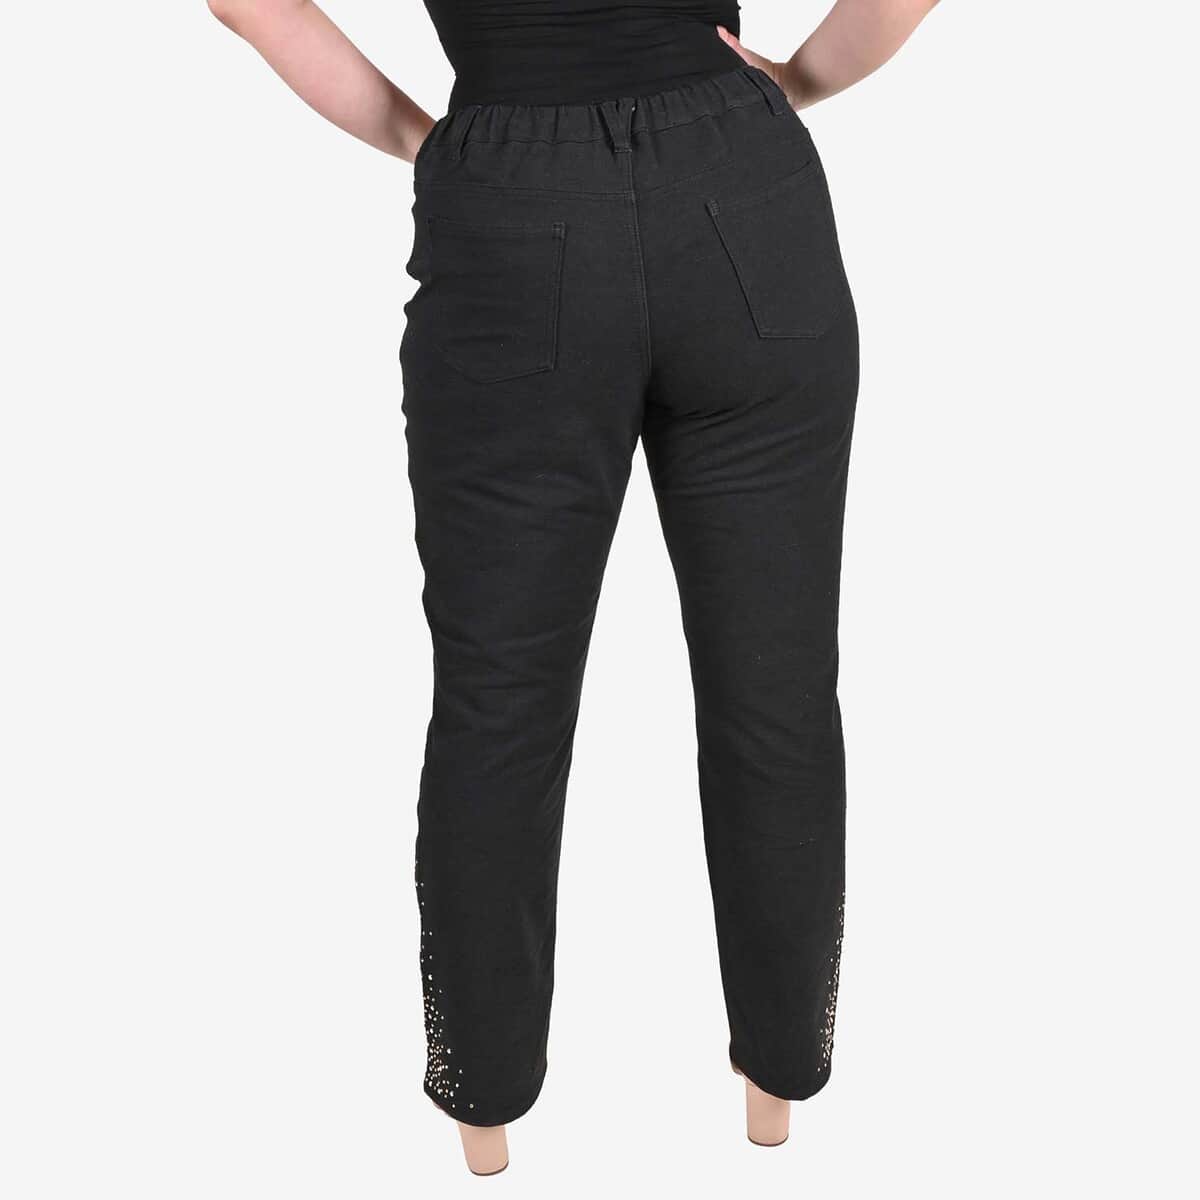 TAMSY Black Pants with Sparkle Detail - L image number 1